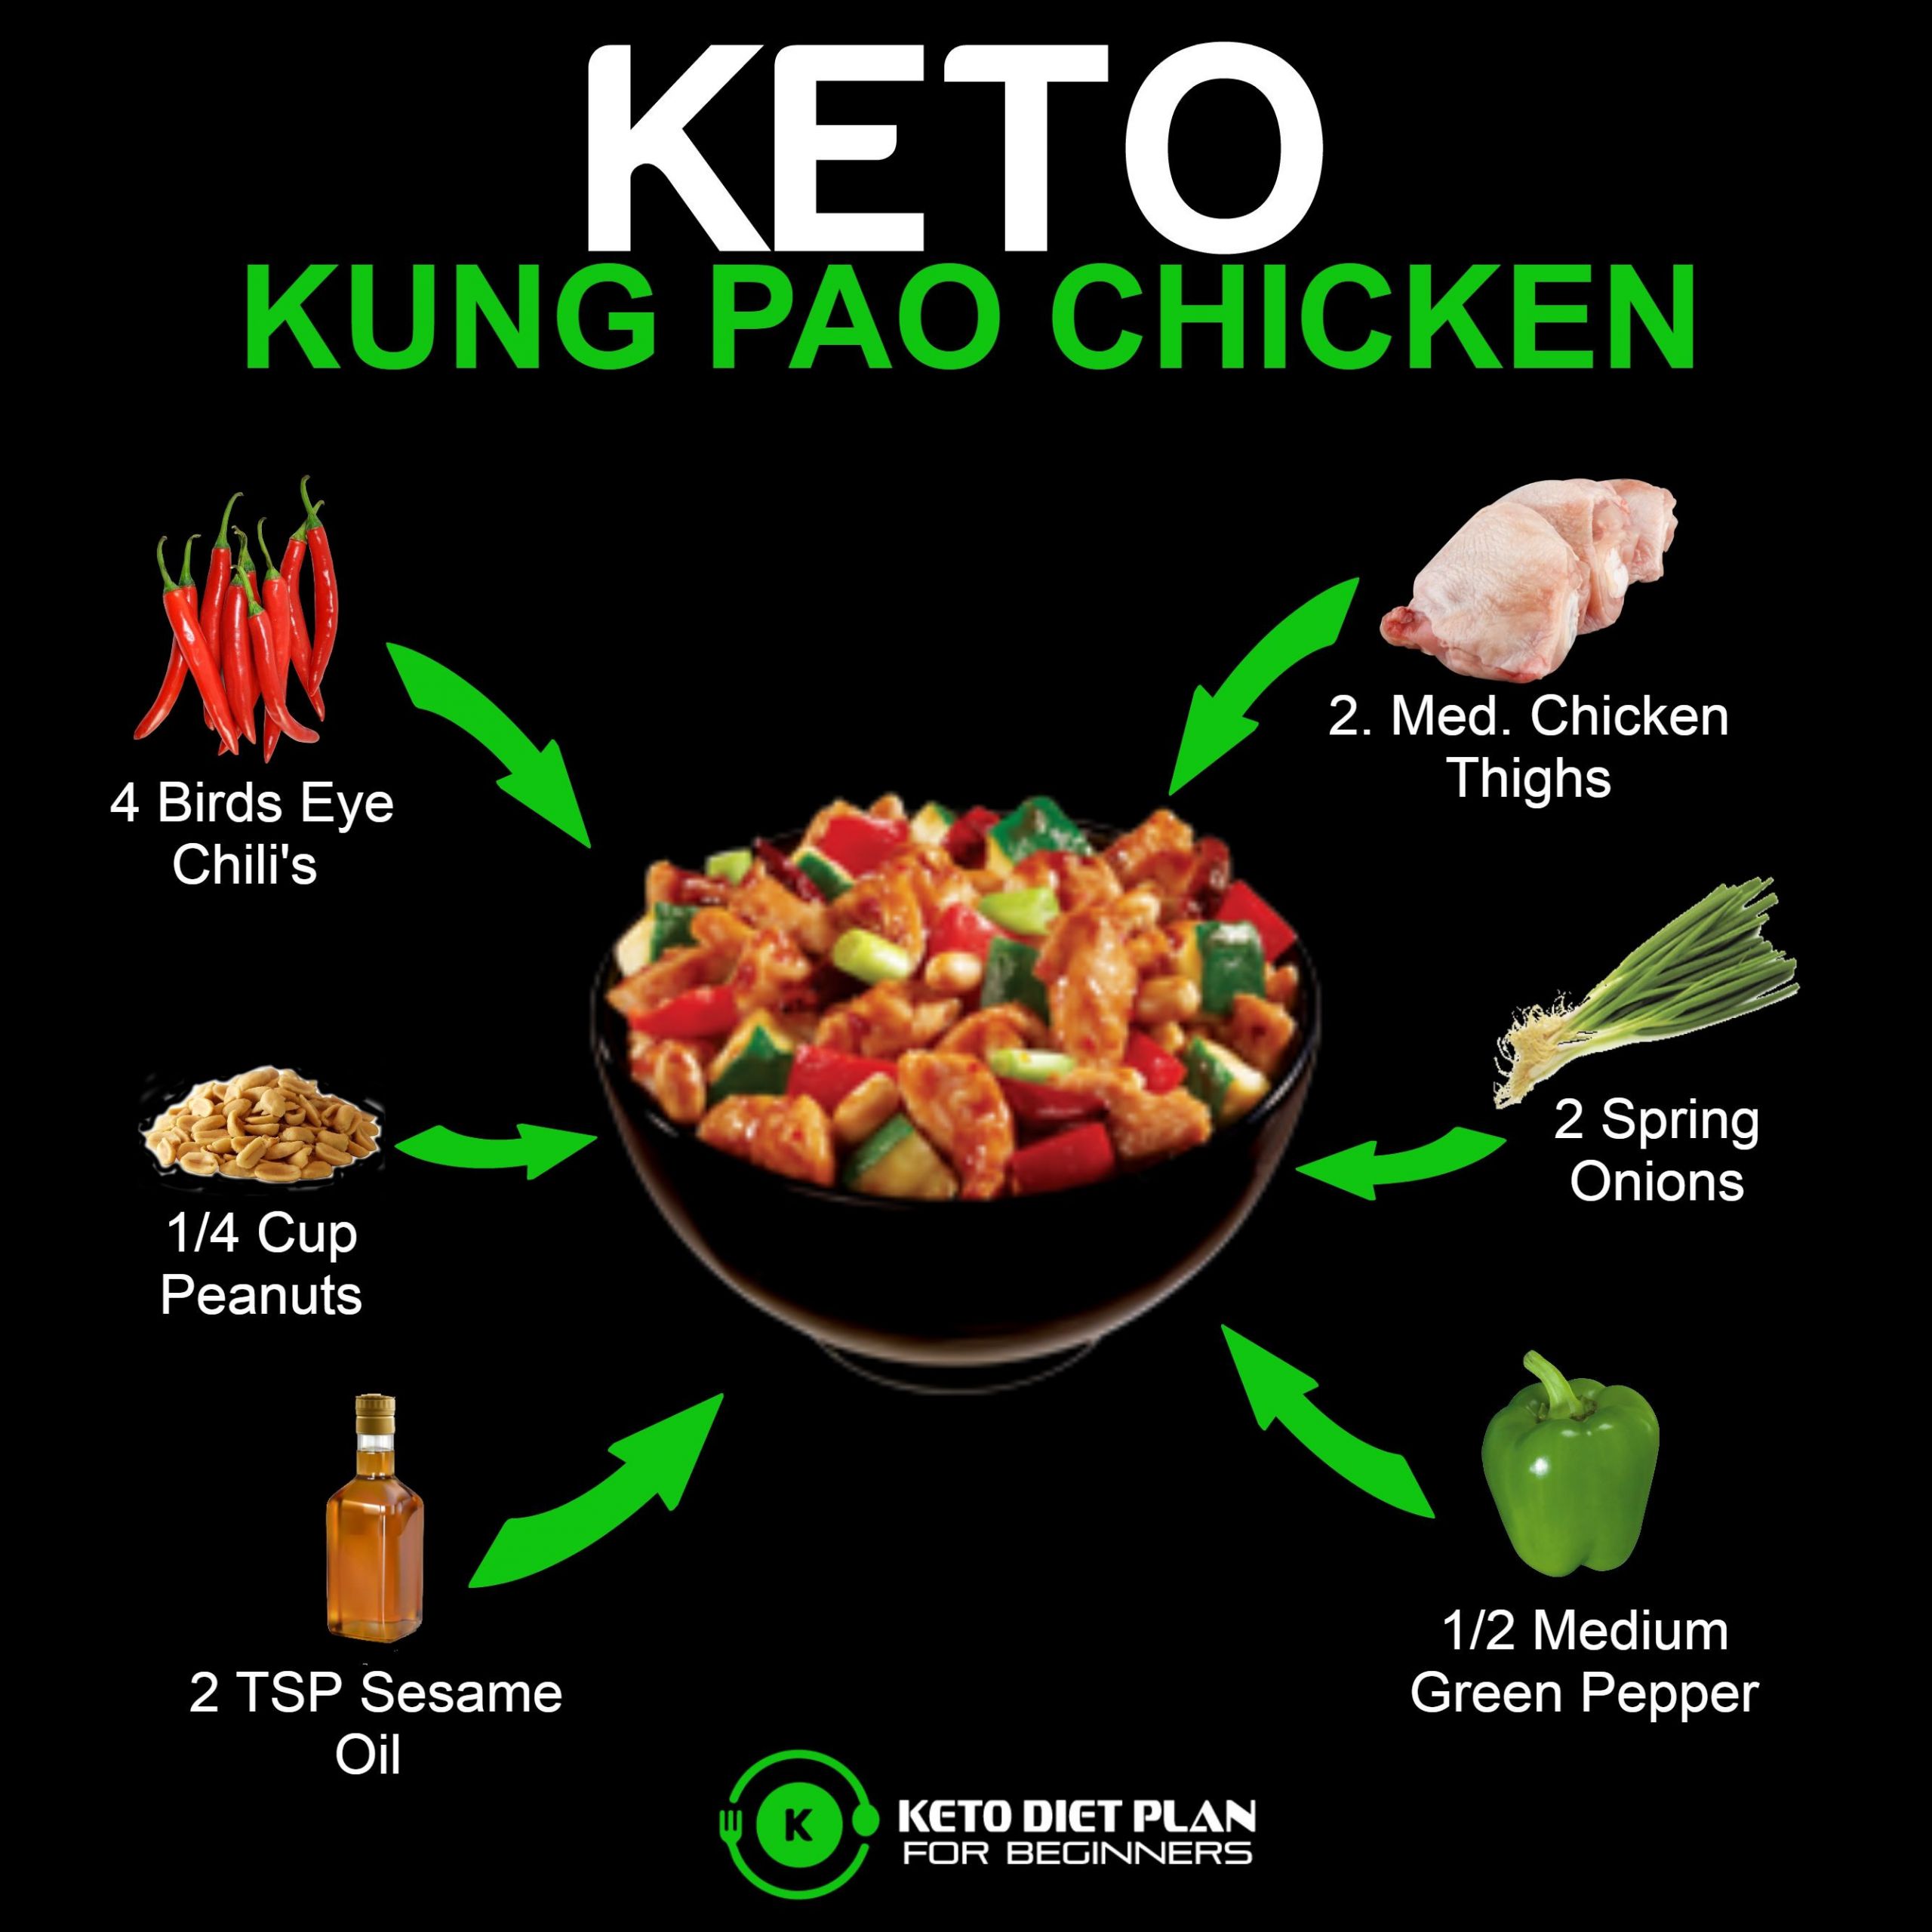 Keto Diet For Beginners Chicken KETO KUNG PAO CHICKEN 🍽Here is a delicious recipe for